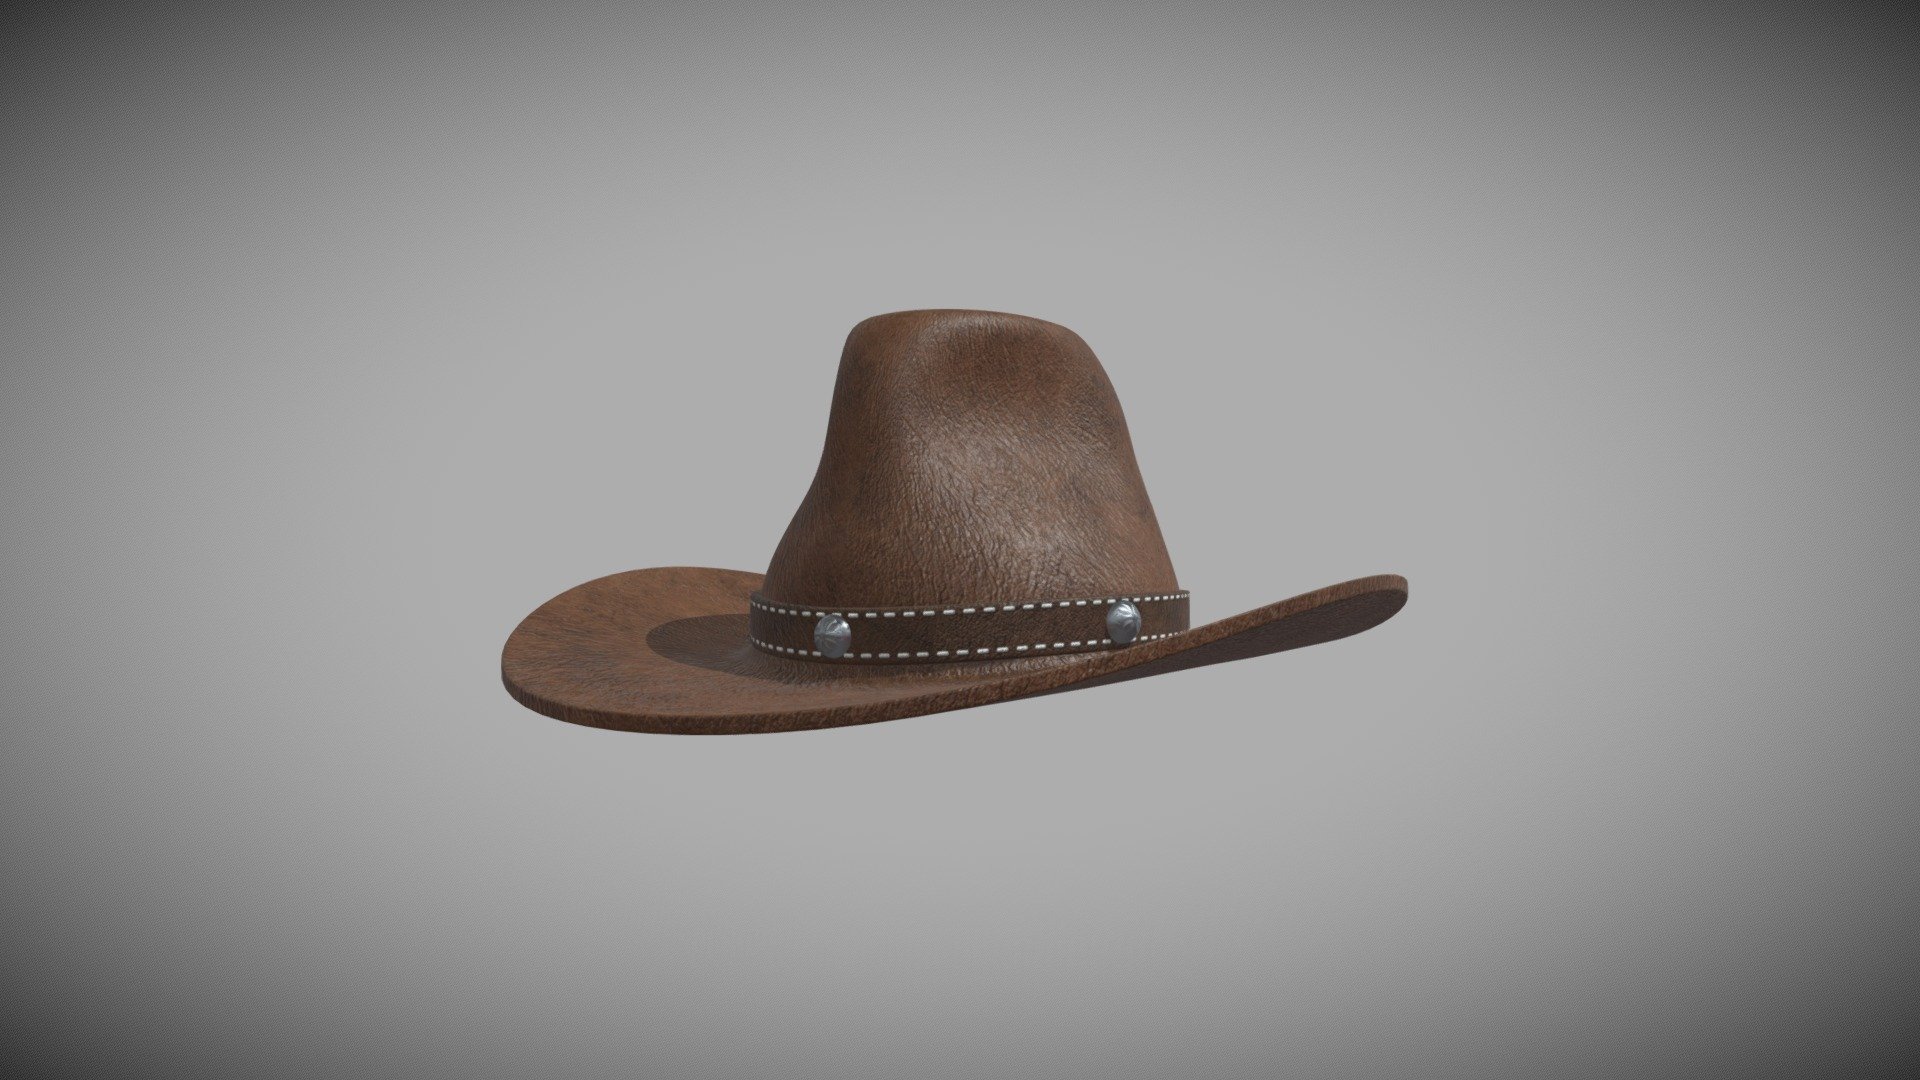 cowboy hat model done in maya and textured in substance painter - cowboy hat - 3D model by ANIL RAVURI (@anilanimation) 3d model